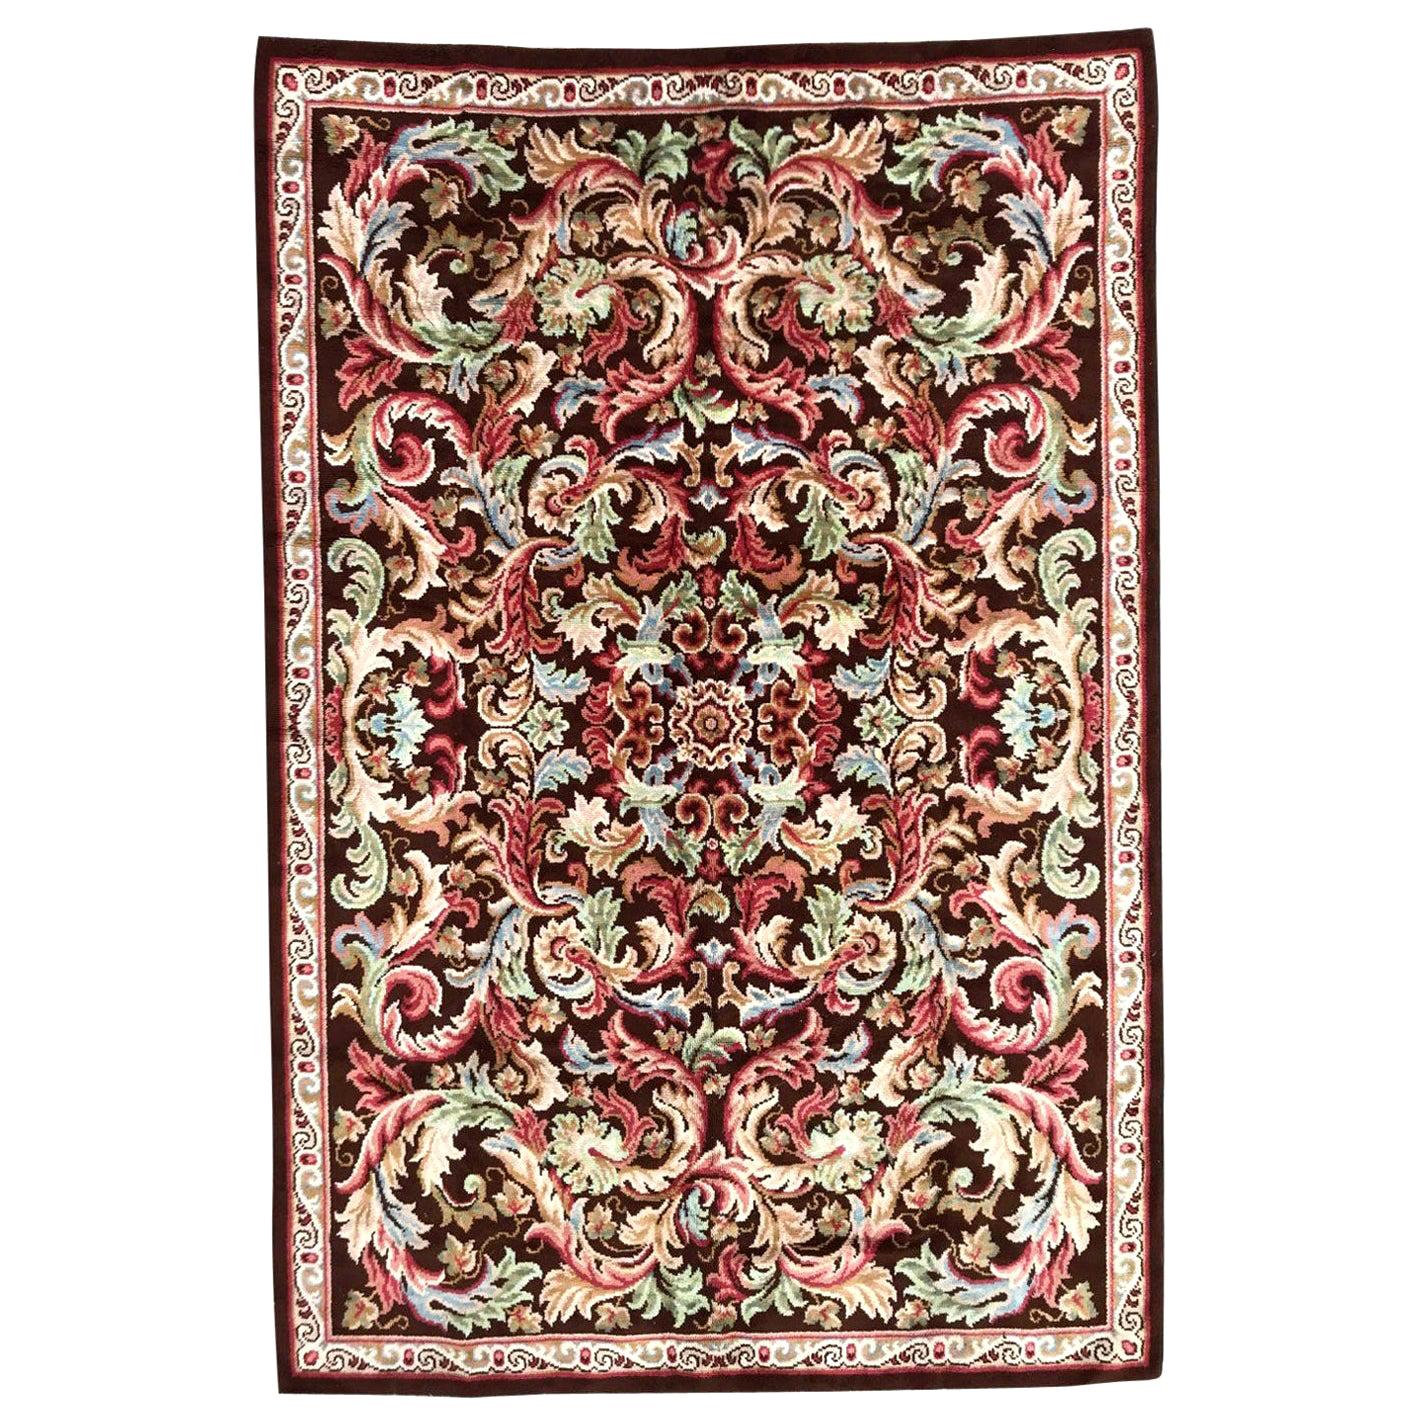 Bobyrug’s Antique French Knotted Aubusson Rug